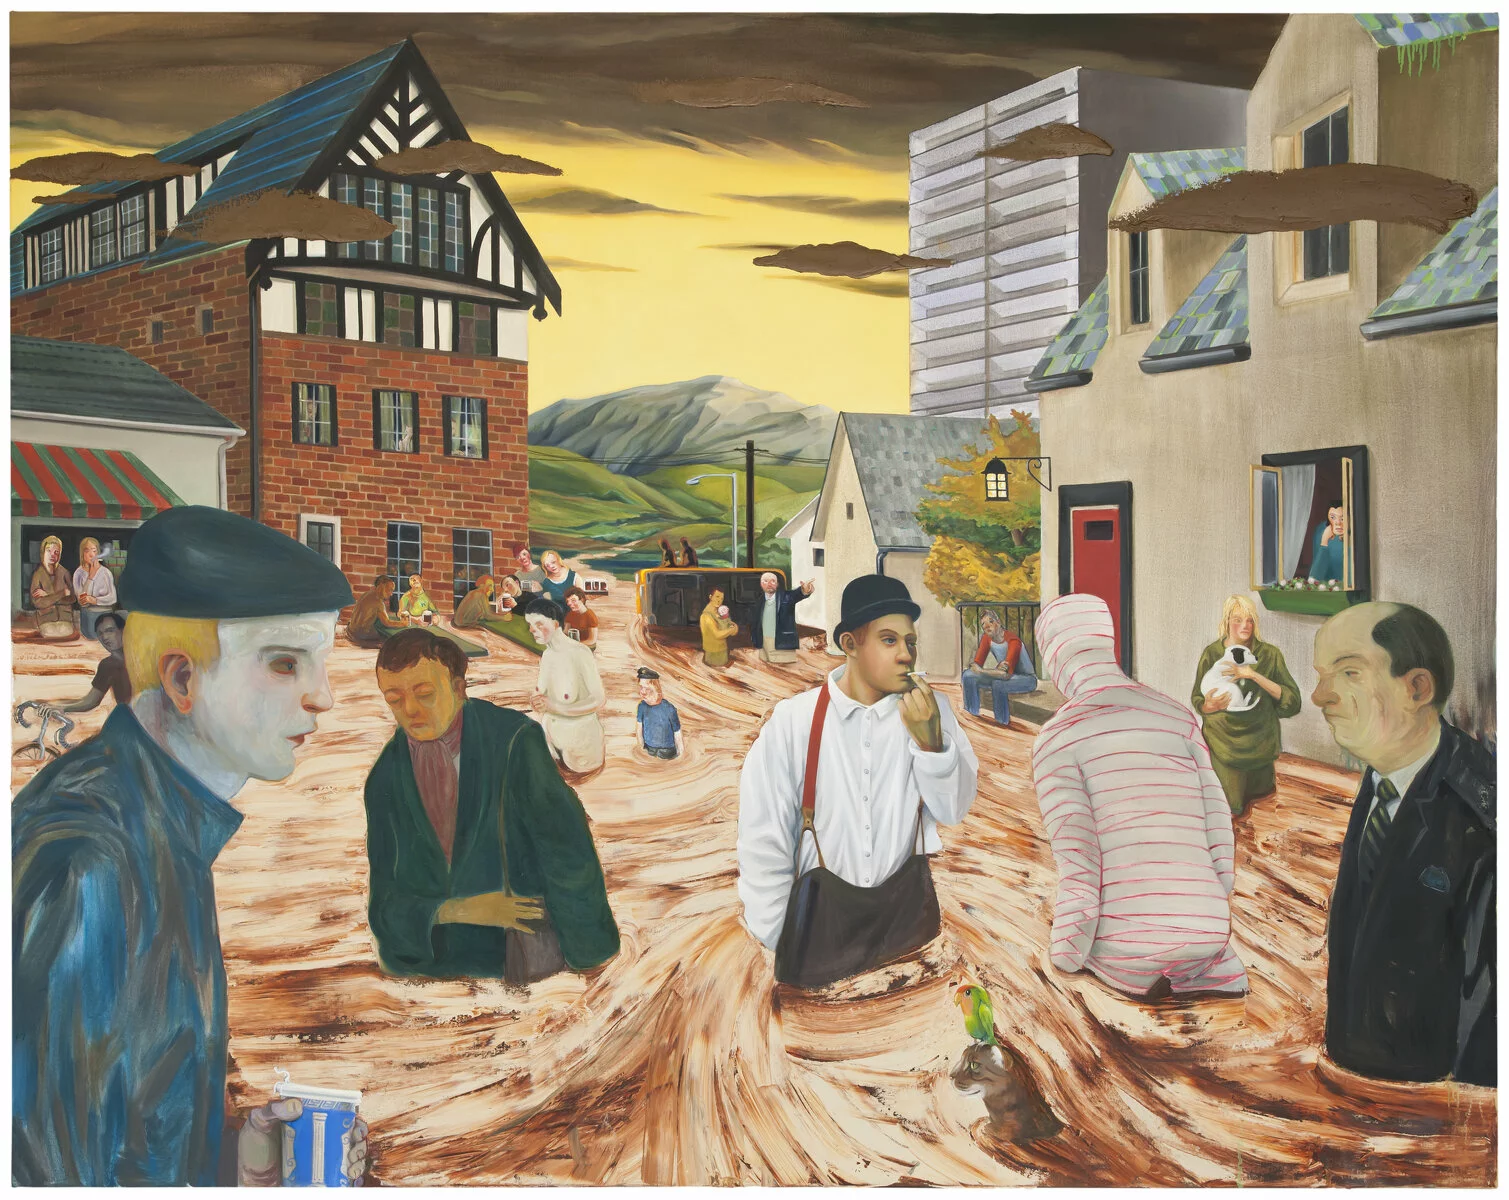 Nicole Eisenman (b. 1965, Verdun, France; lives in Brooklyn, NY), <em>Coping</em>, 2008. Oil on canvas; 65 × 82 1/8 in. (165 × 208.5 cm). Collection of Igor DaCosta and James Rondeau, courtesy of Galerie Barbara Weiss. Photo: Bryan Conley, © 2023 Carnegie Museum of Art, Pittsburgh. 2023/12/101000.jpg 